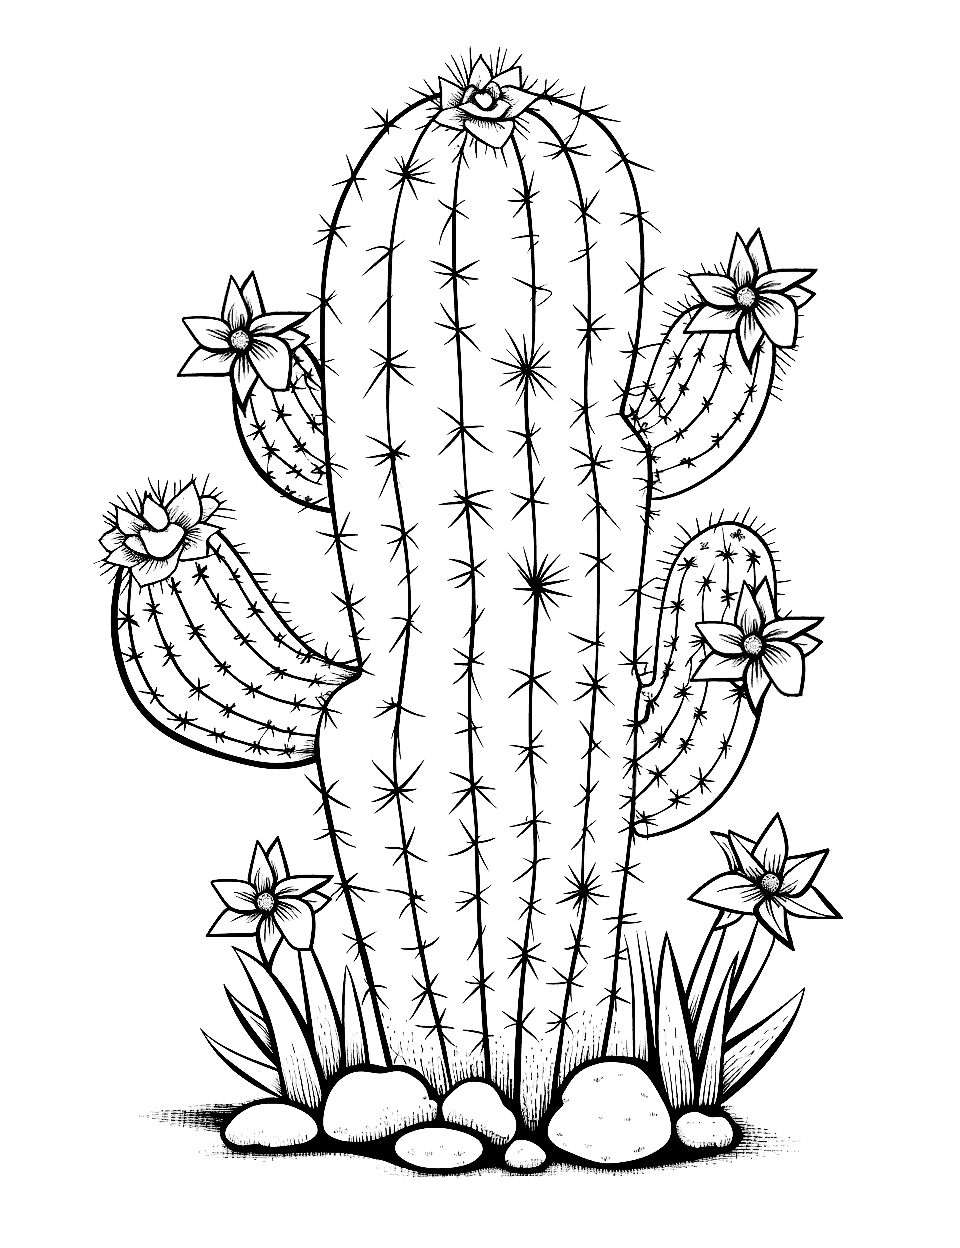 Cactus with Intricate Details Coloring Page - A cactus drawing with detailed spikes and textures, offering a coloring challenge.